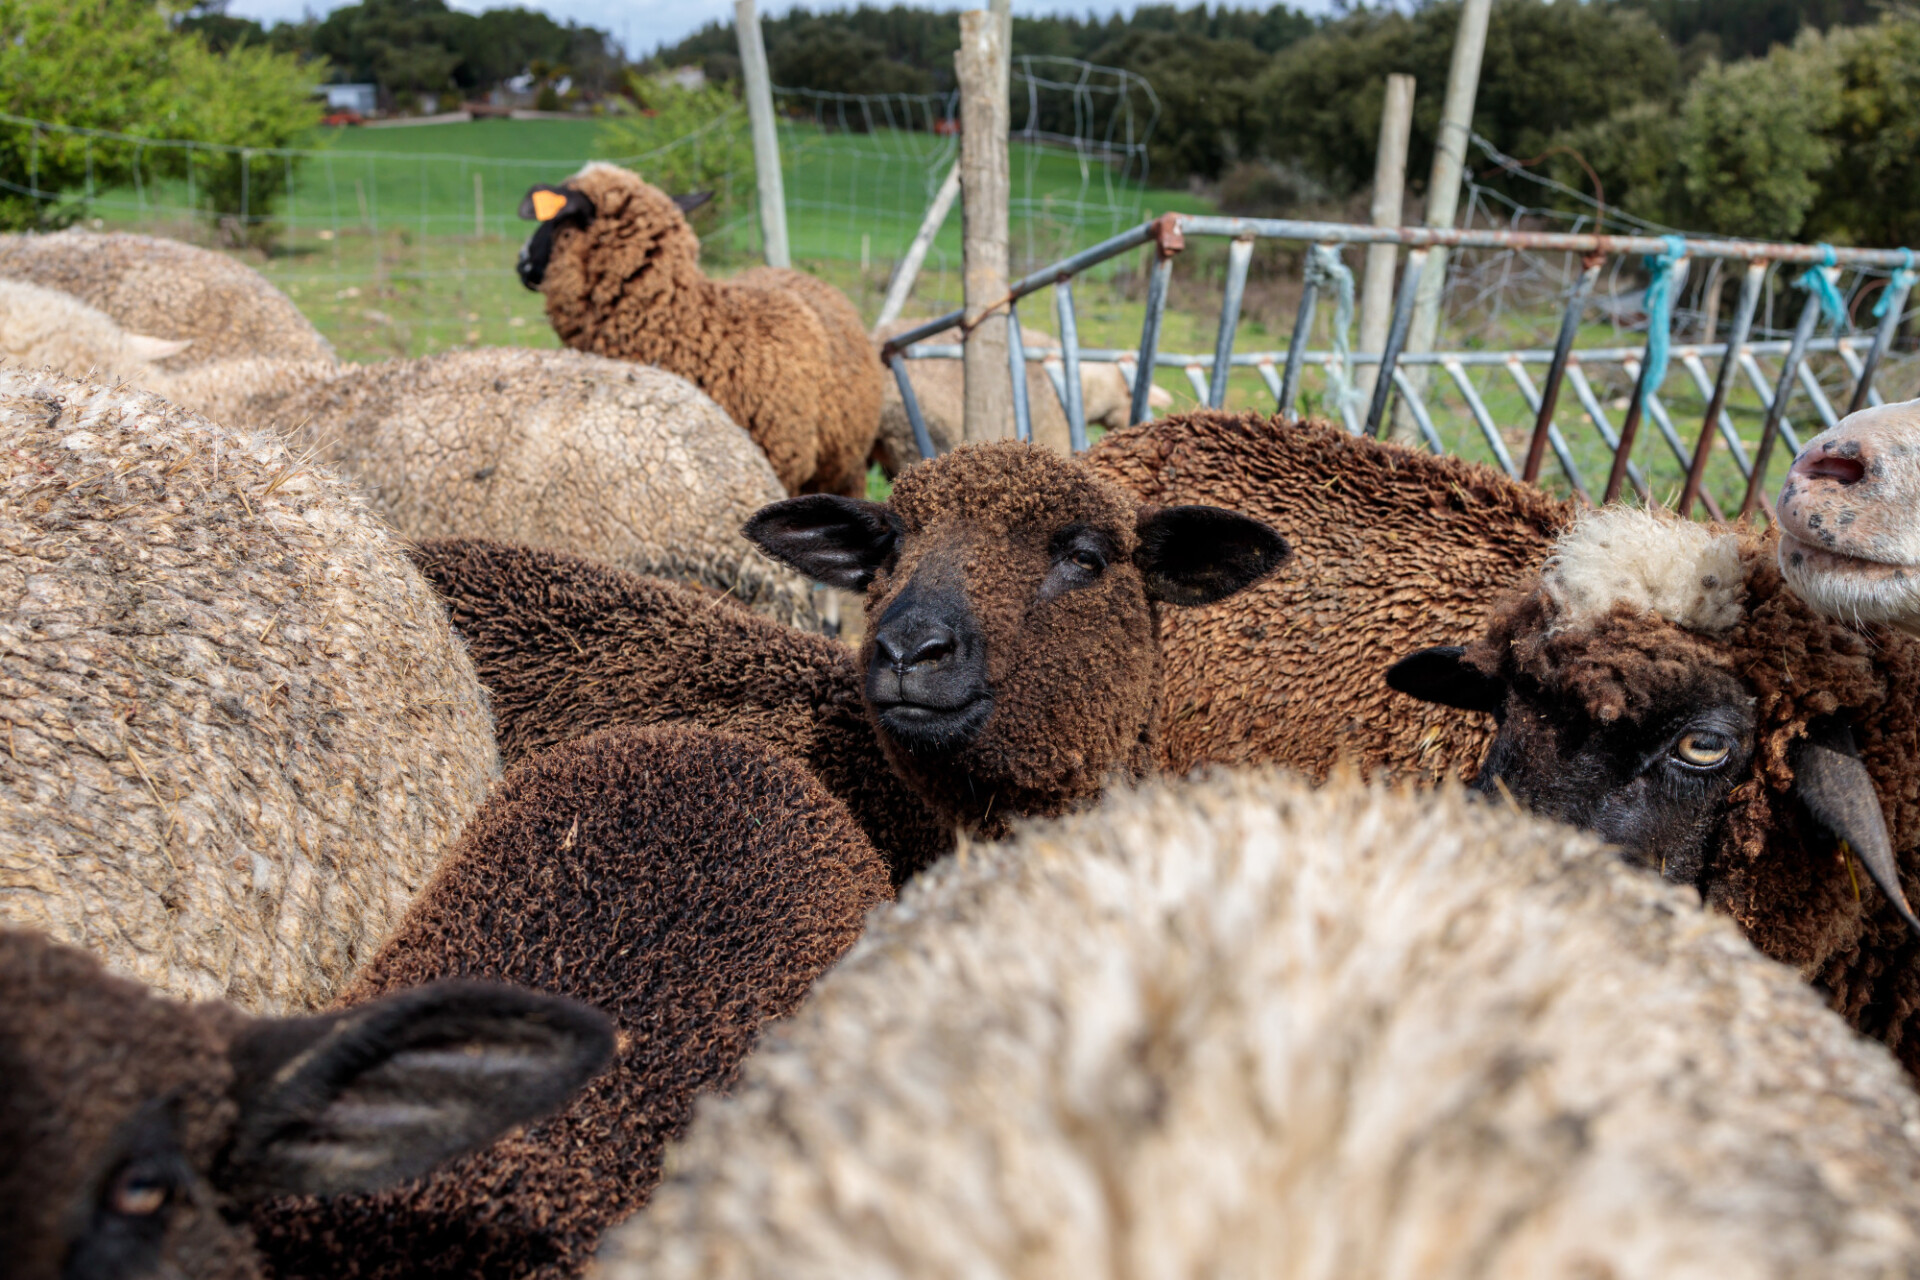 Brown sheep in the middle of its flock